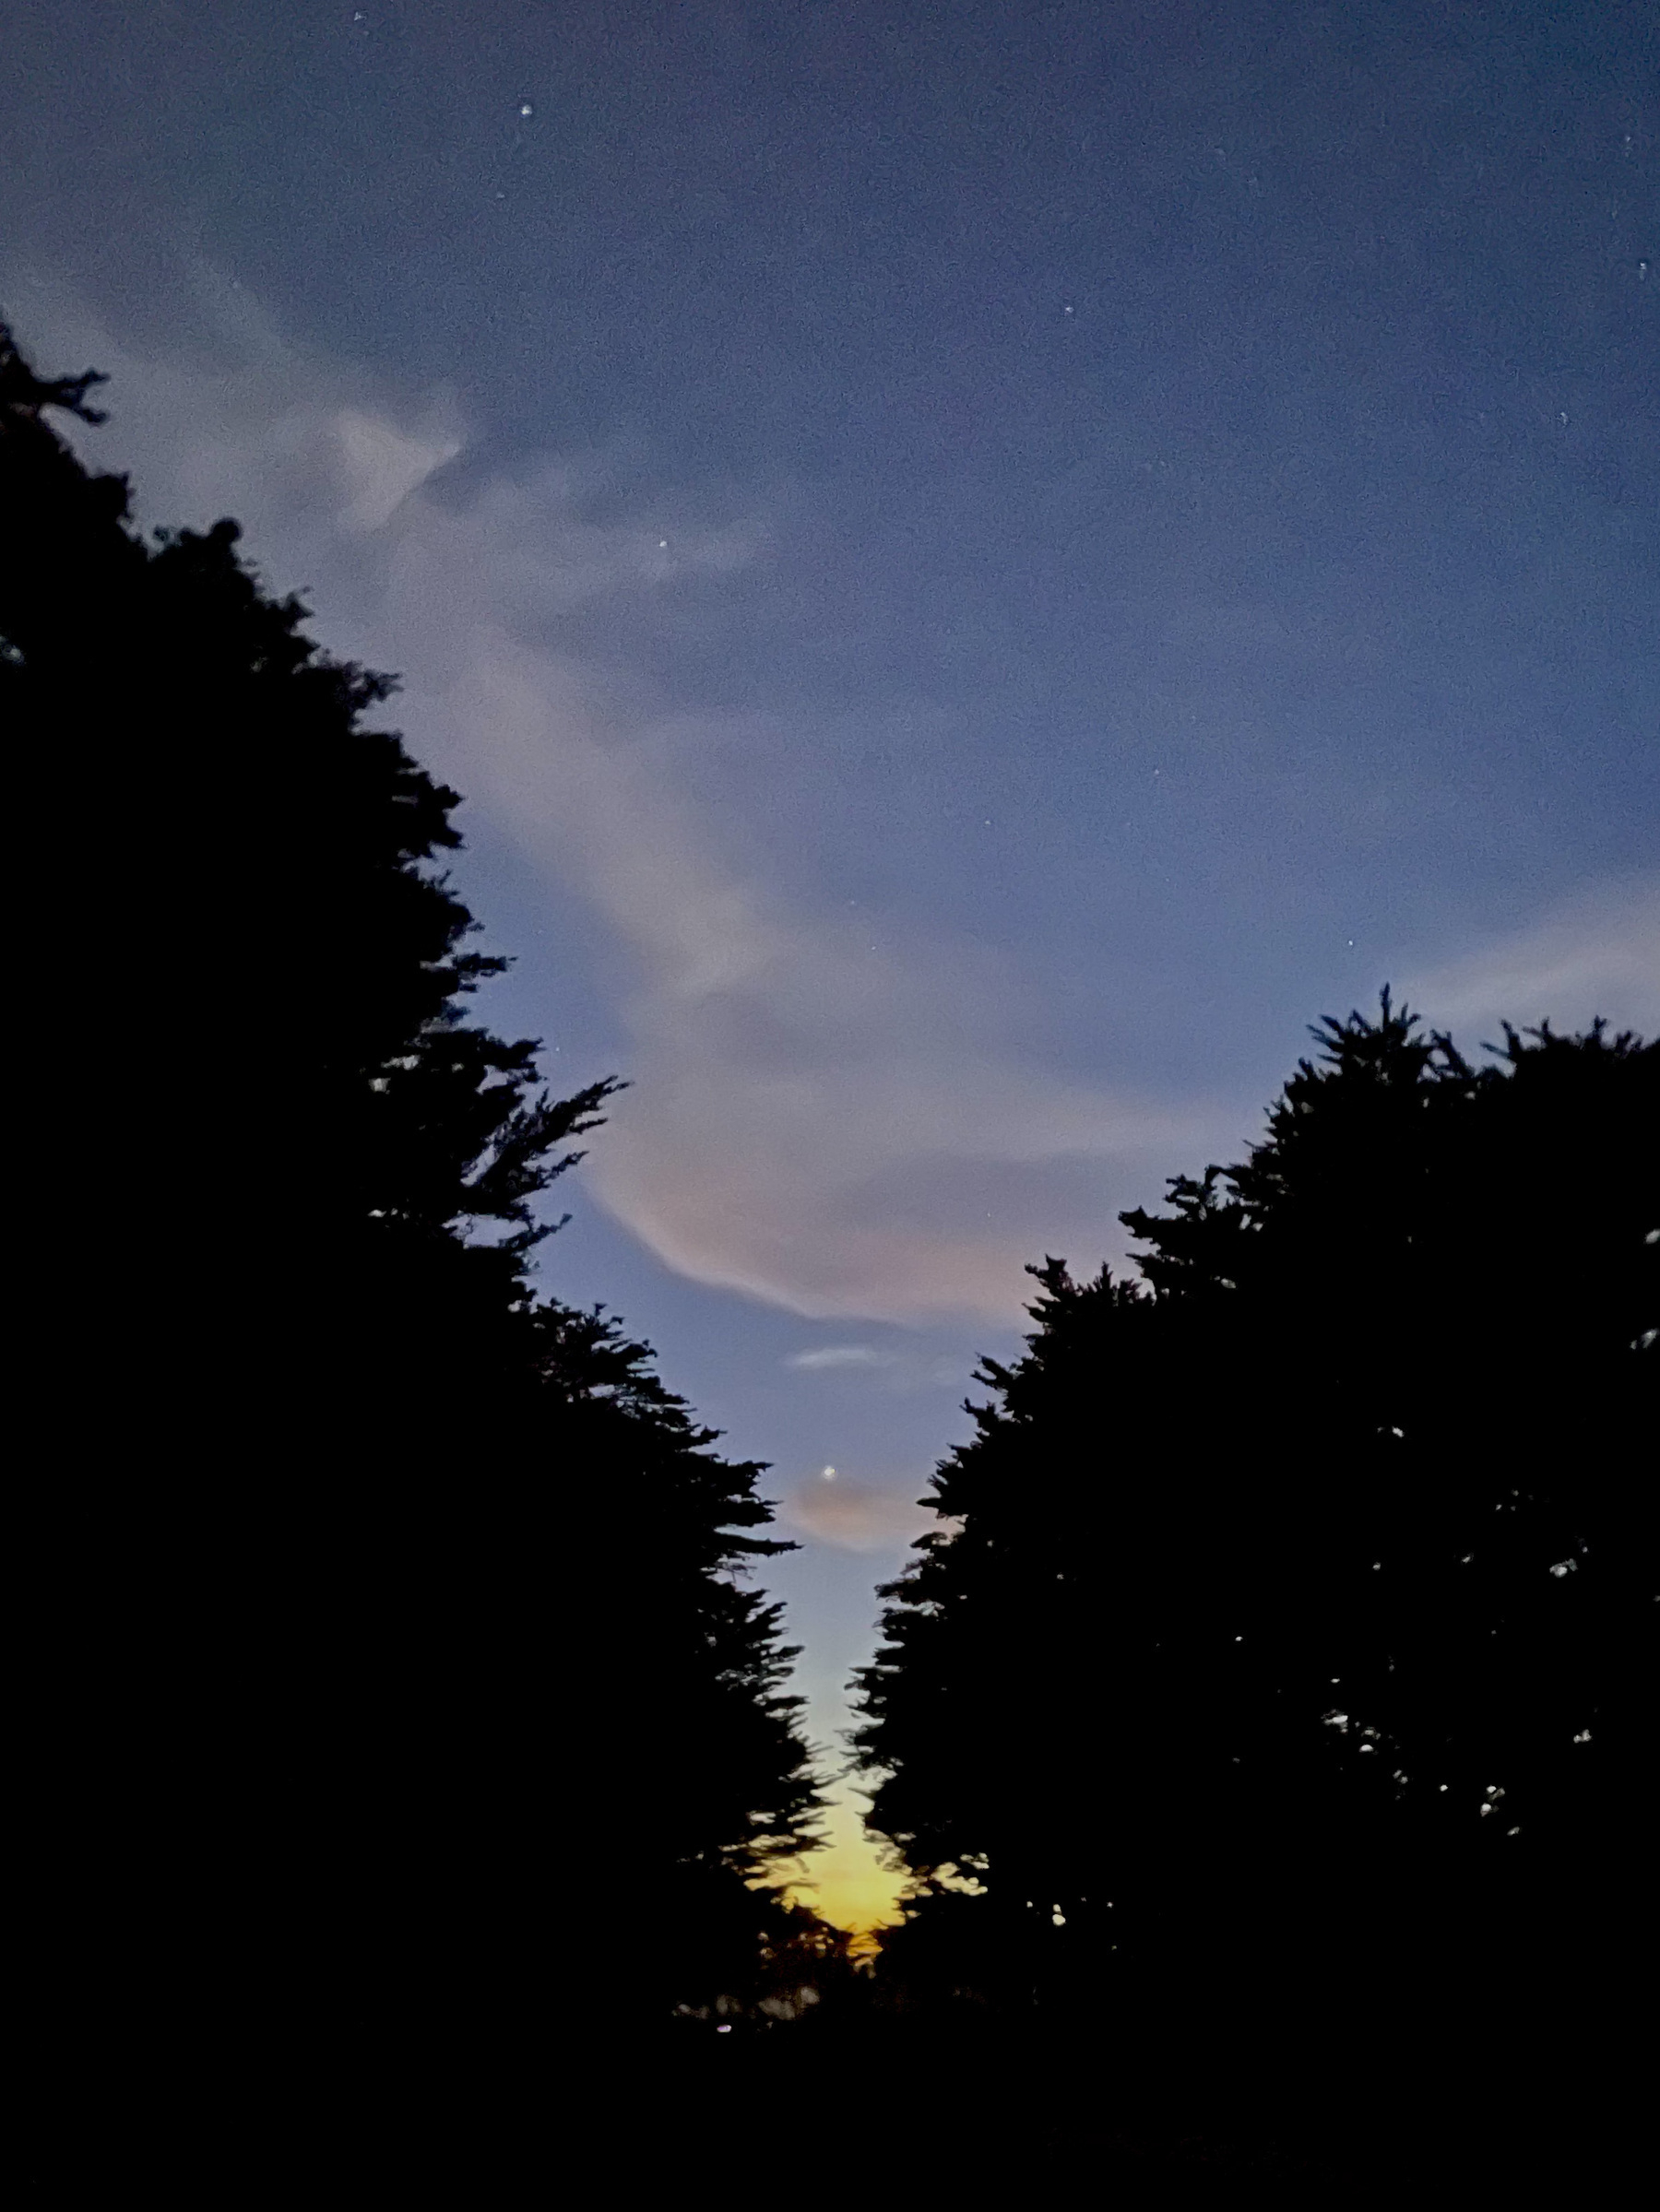 The conjunction of Jupiter and Saturn between trees